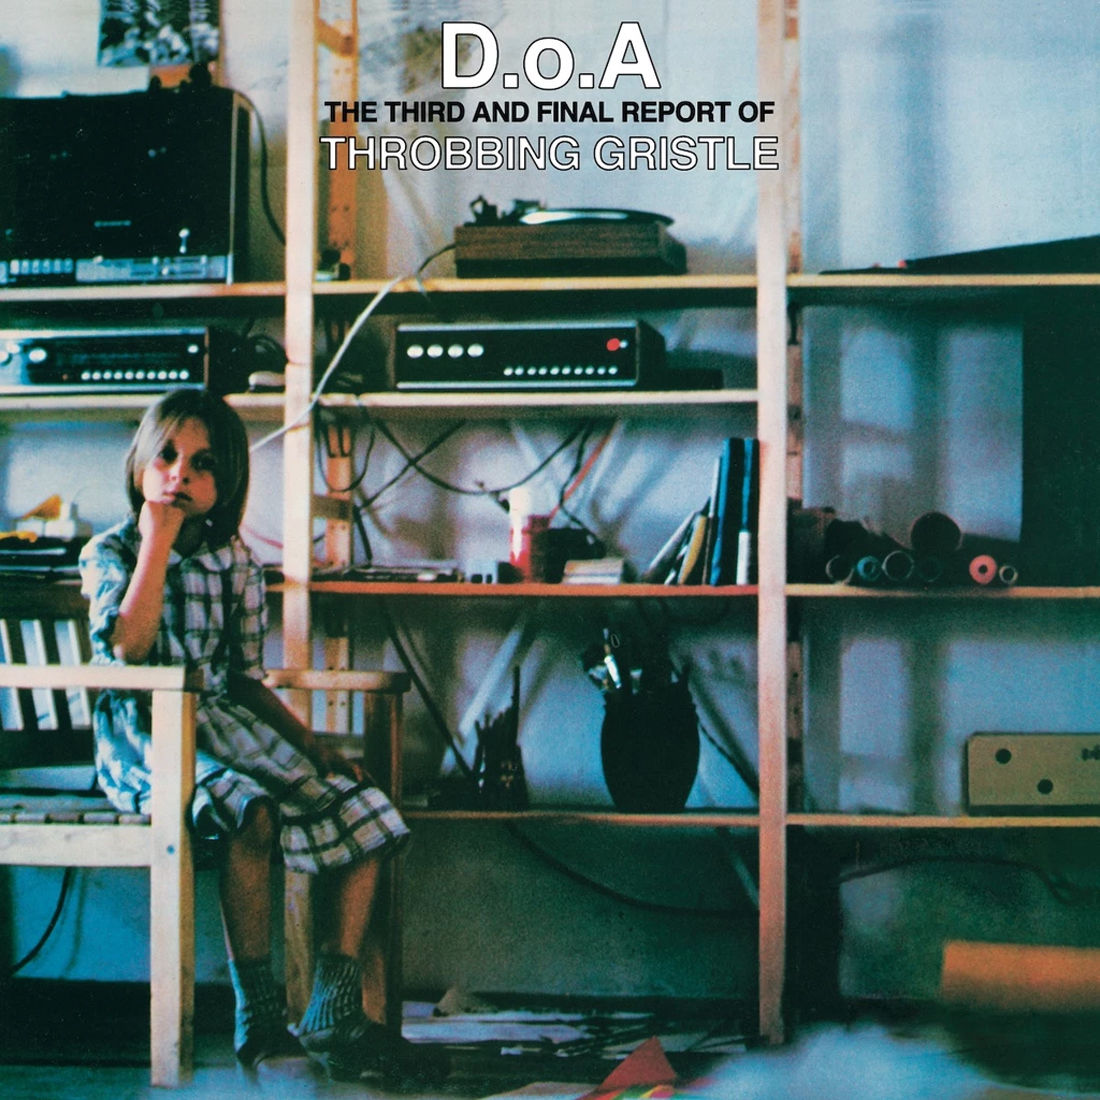 D.O.A. The Third And Final Report Of Throbbing Gristle: Limited Edition Transparent Green Vinyl LP